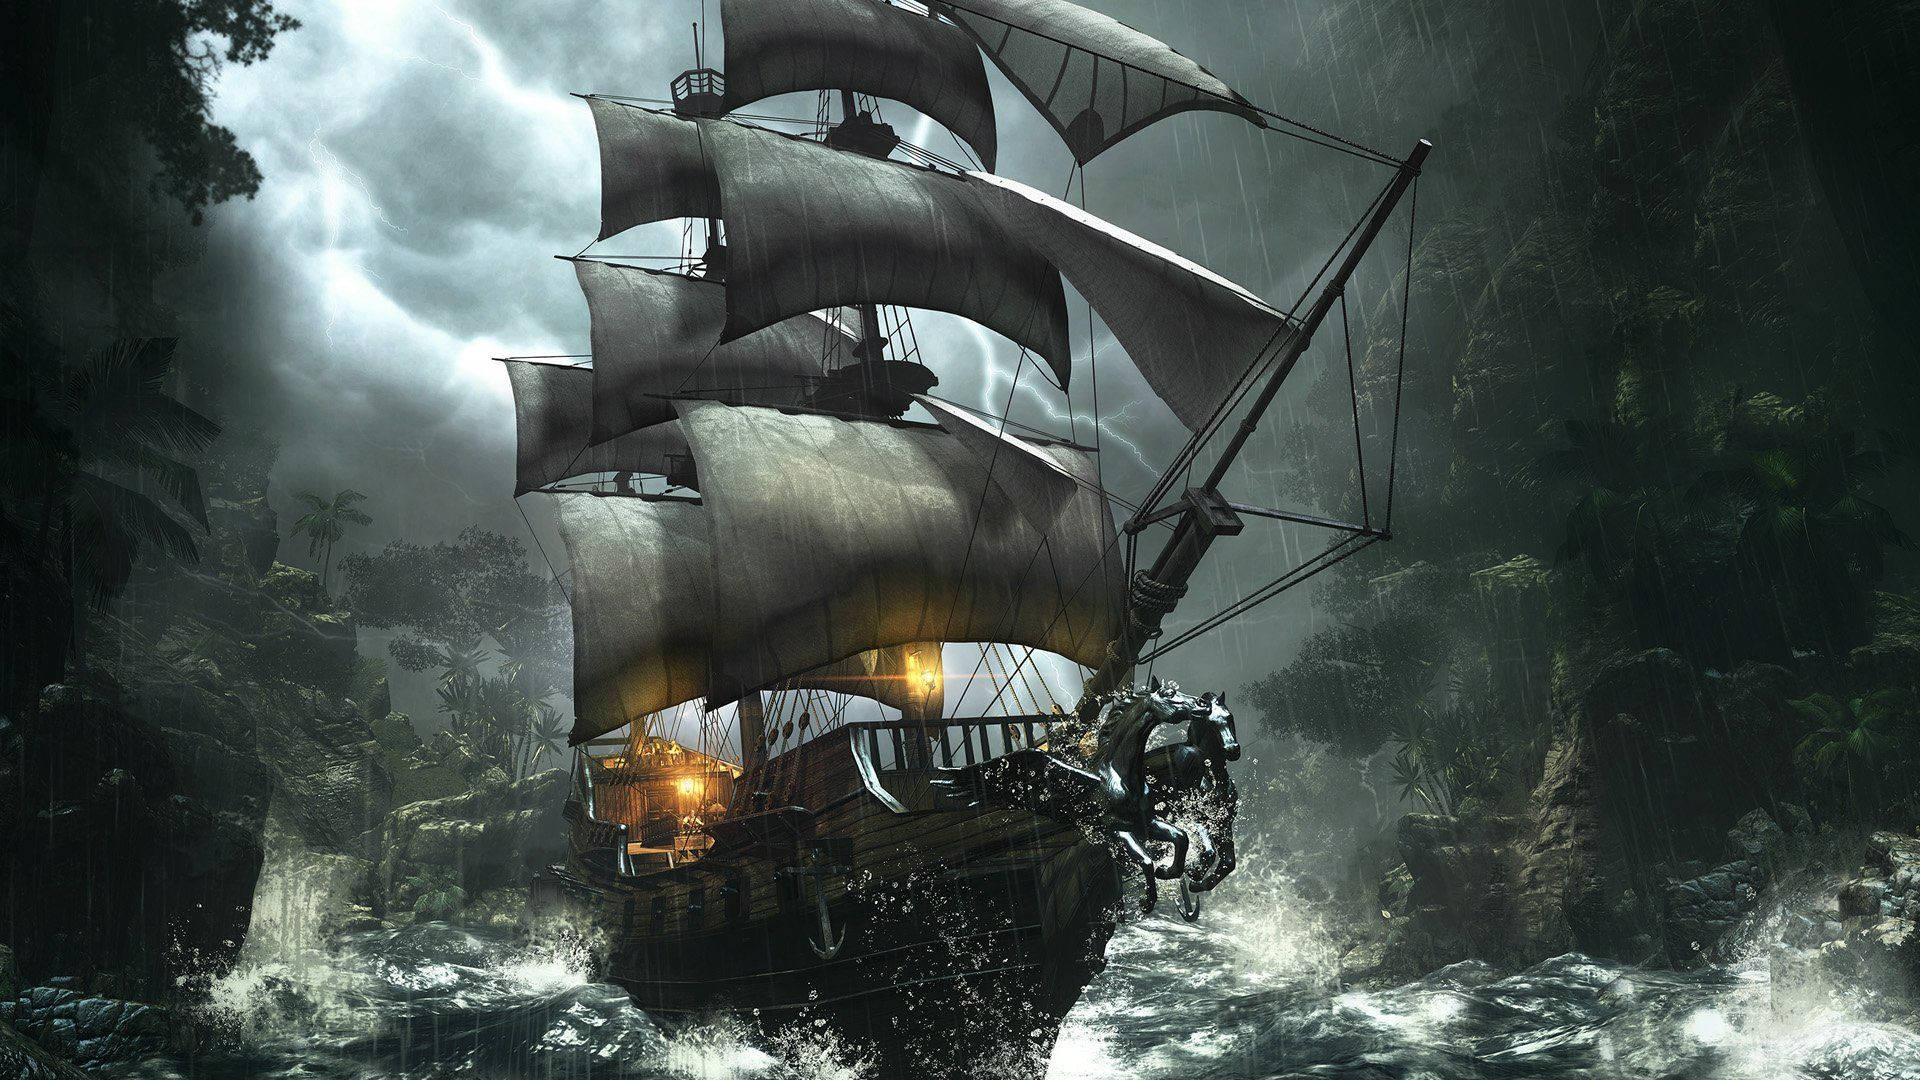 Pirate Ship In Storm Background